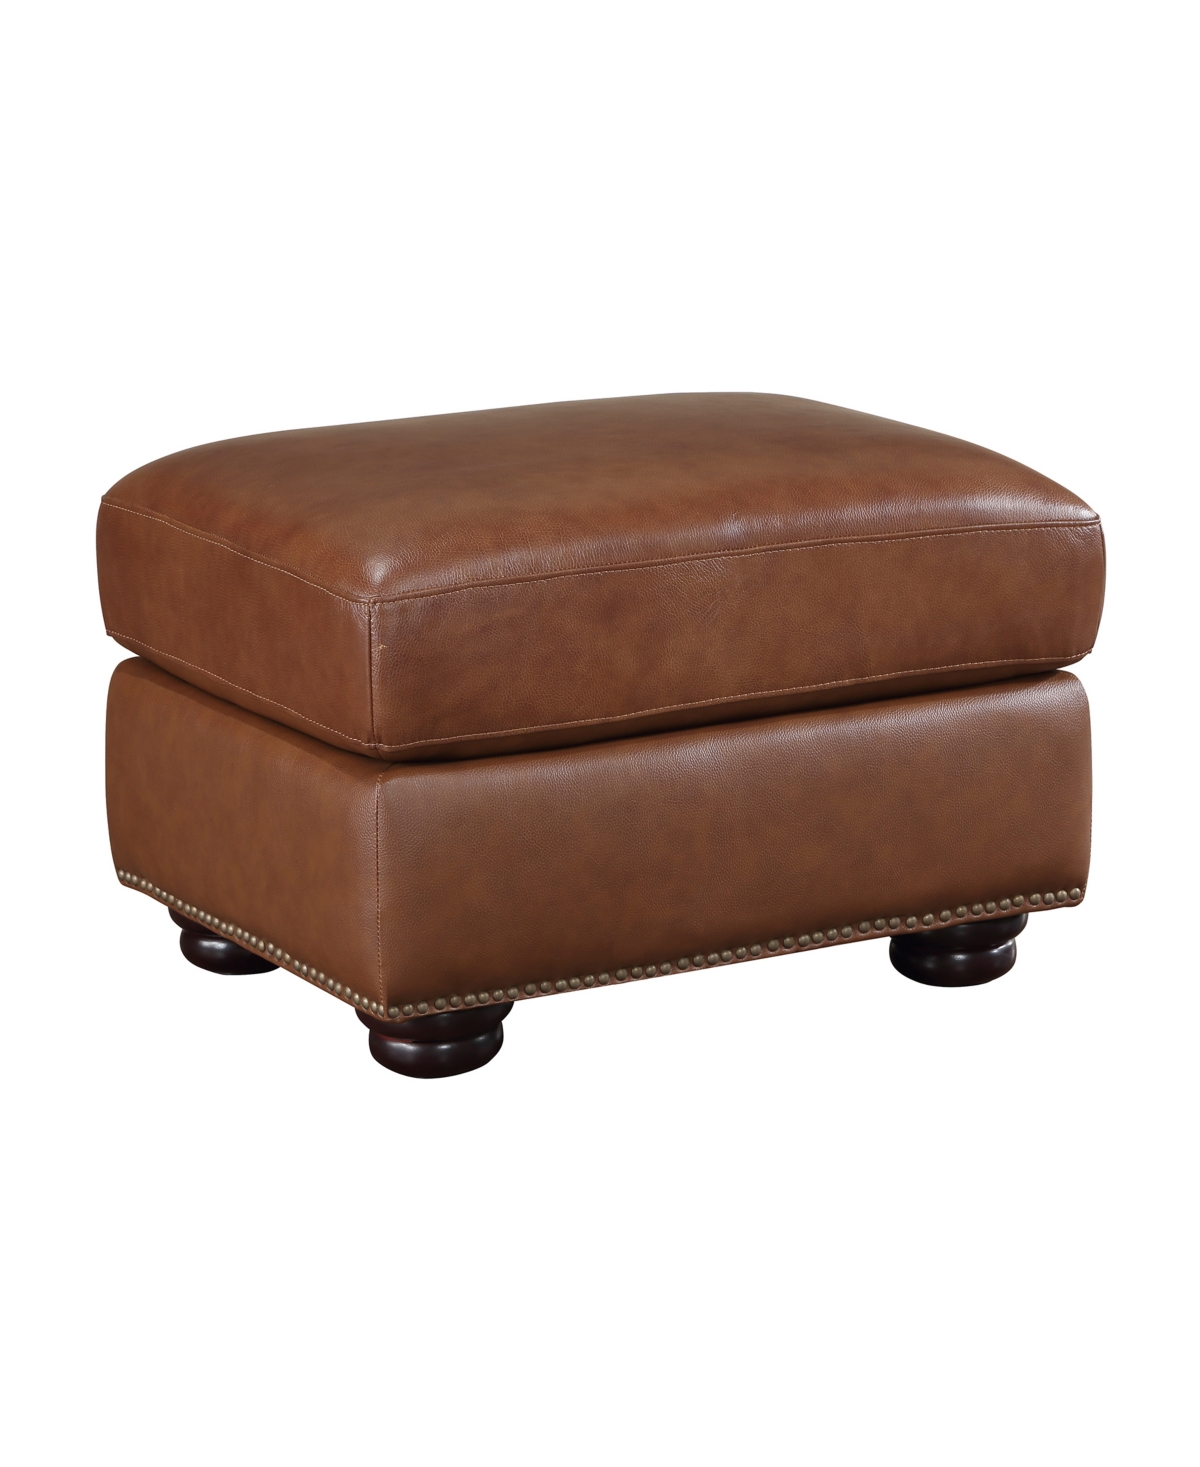 Homelegance White Label Dadeville 28" Leather Match Ottoman In Camel Brown